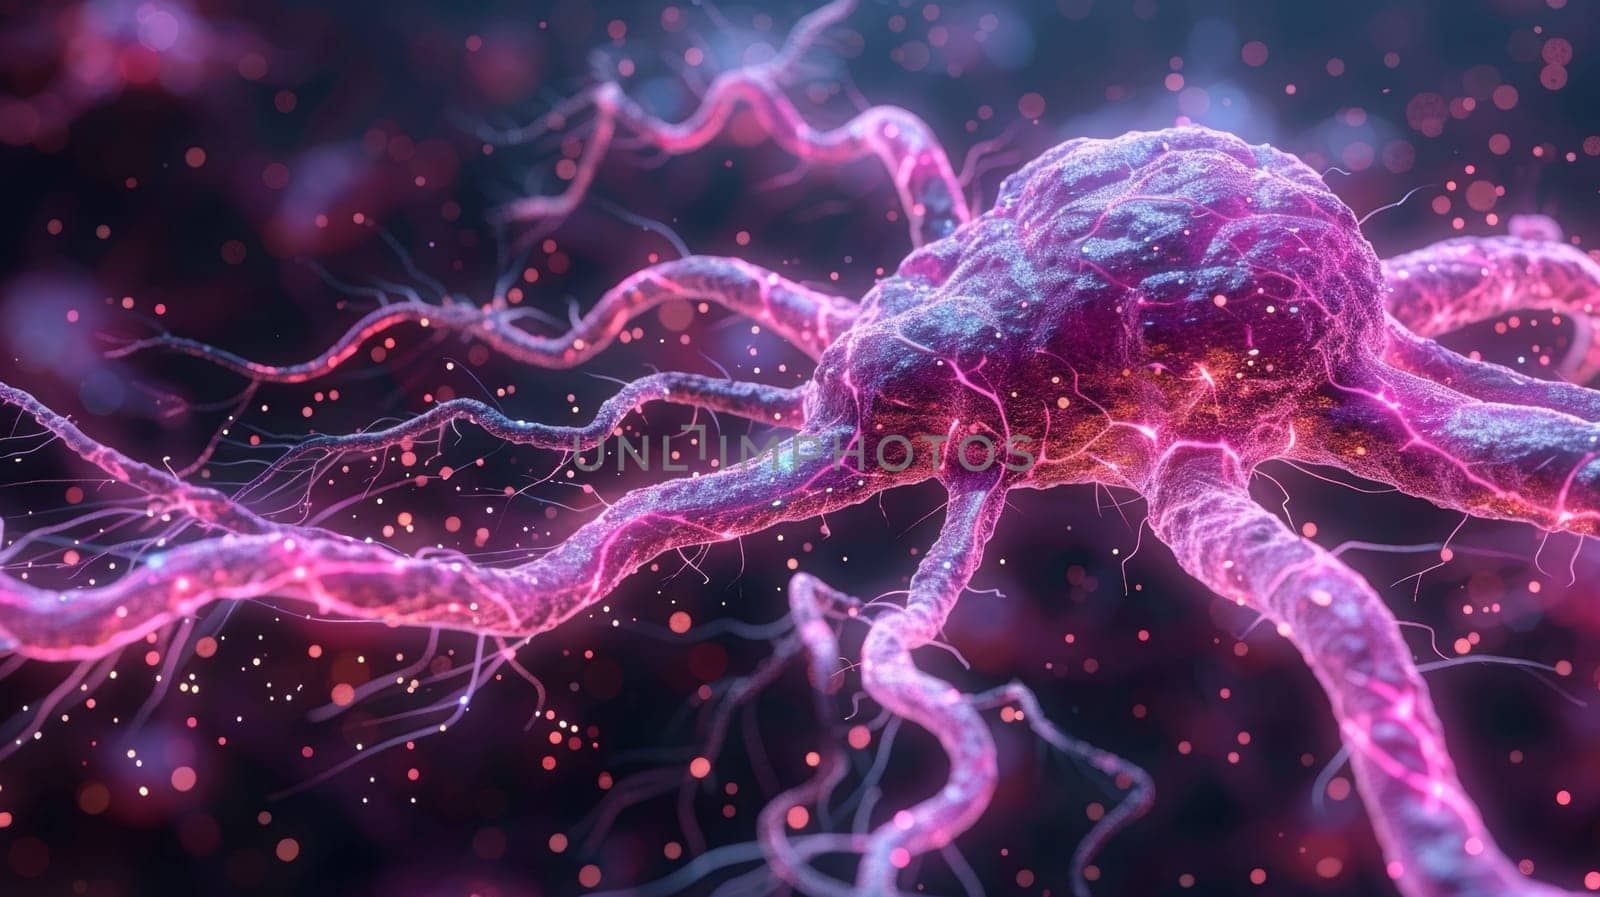 A close up of a neuron cell with pink and purple lights